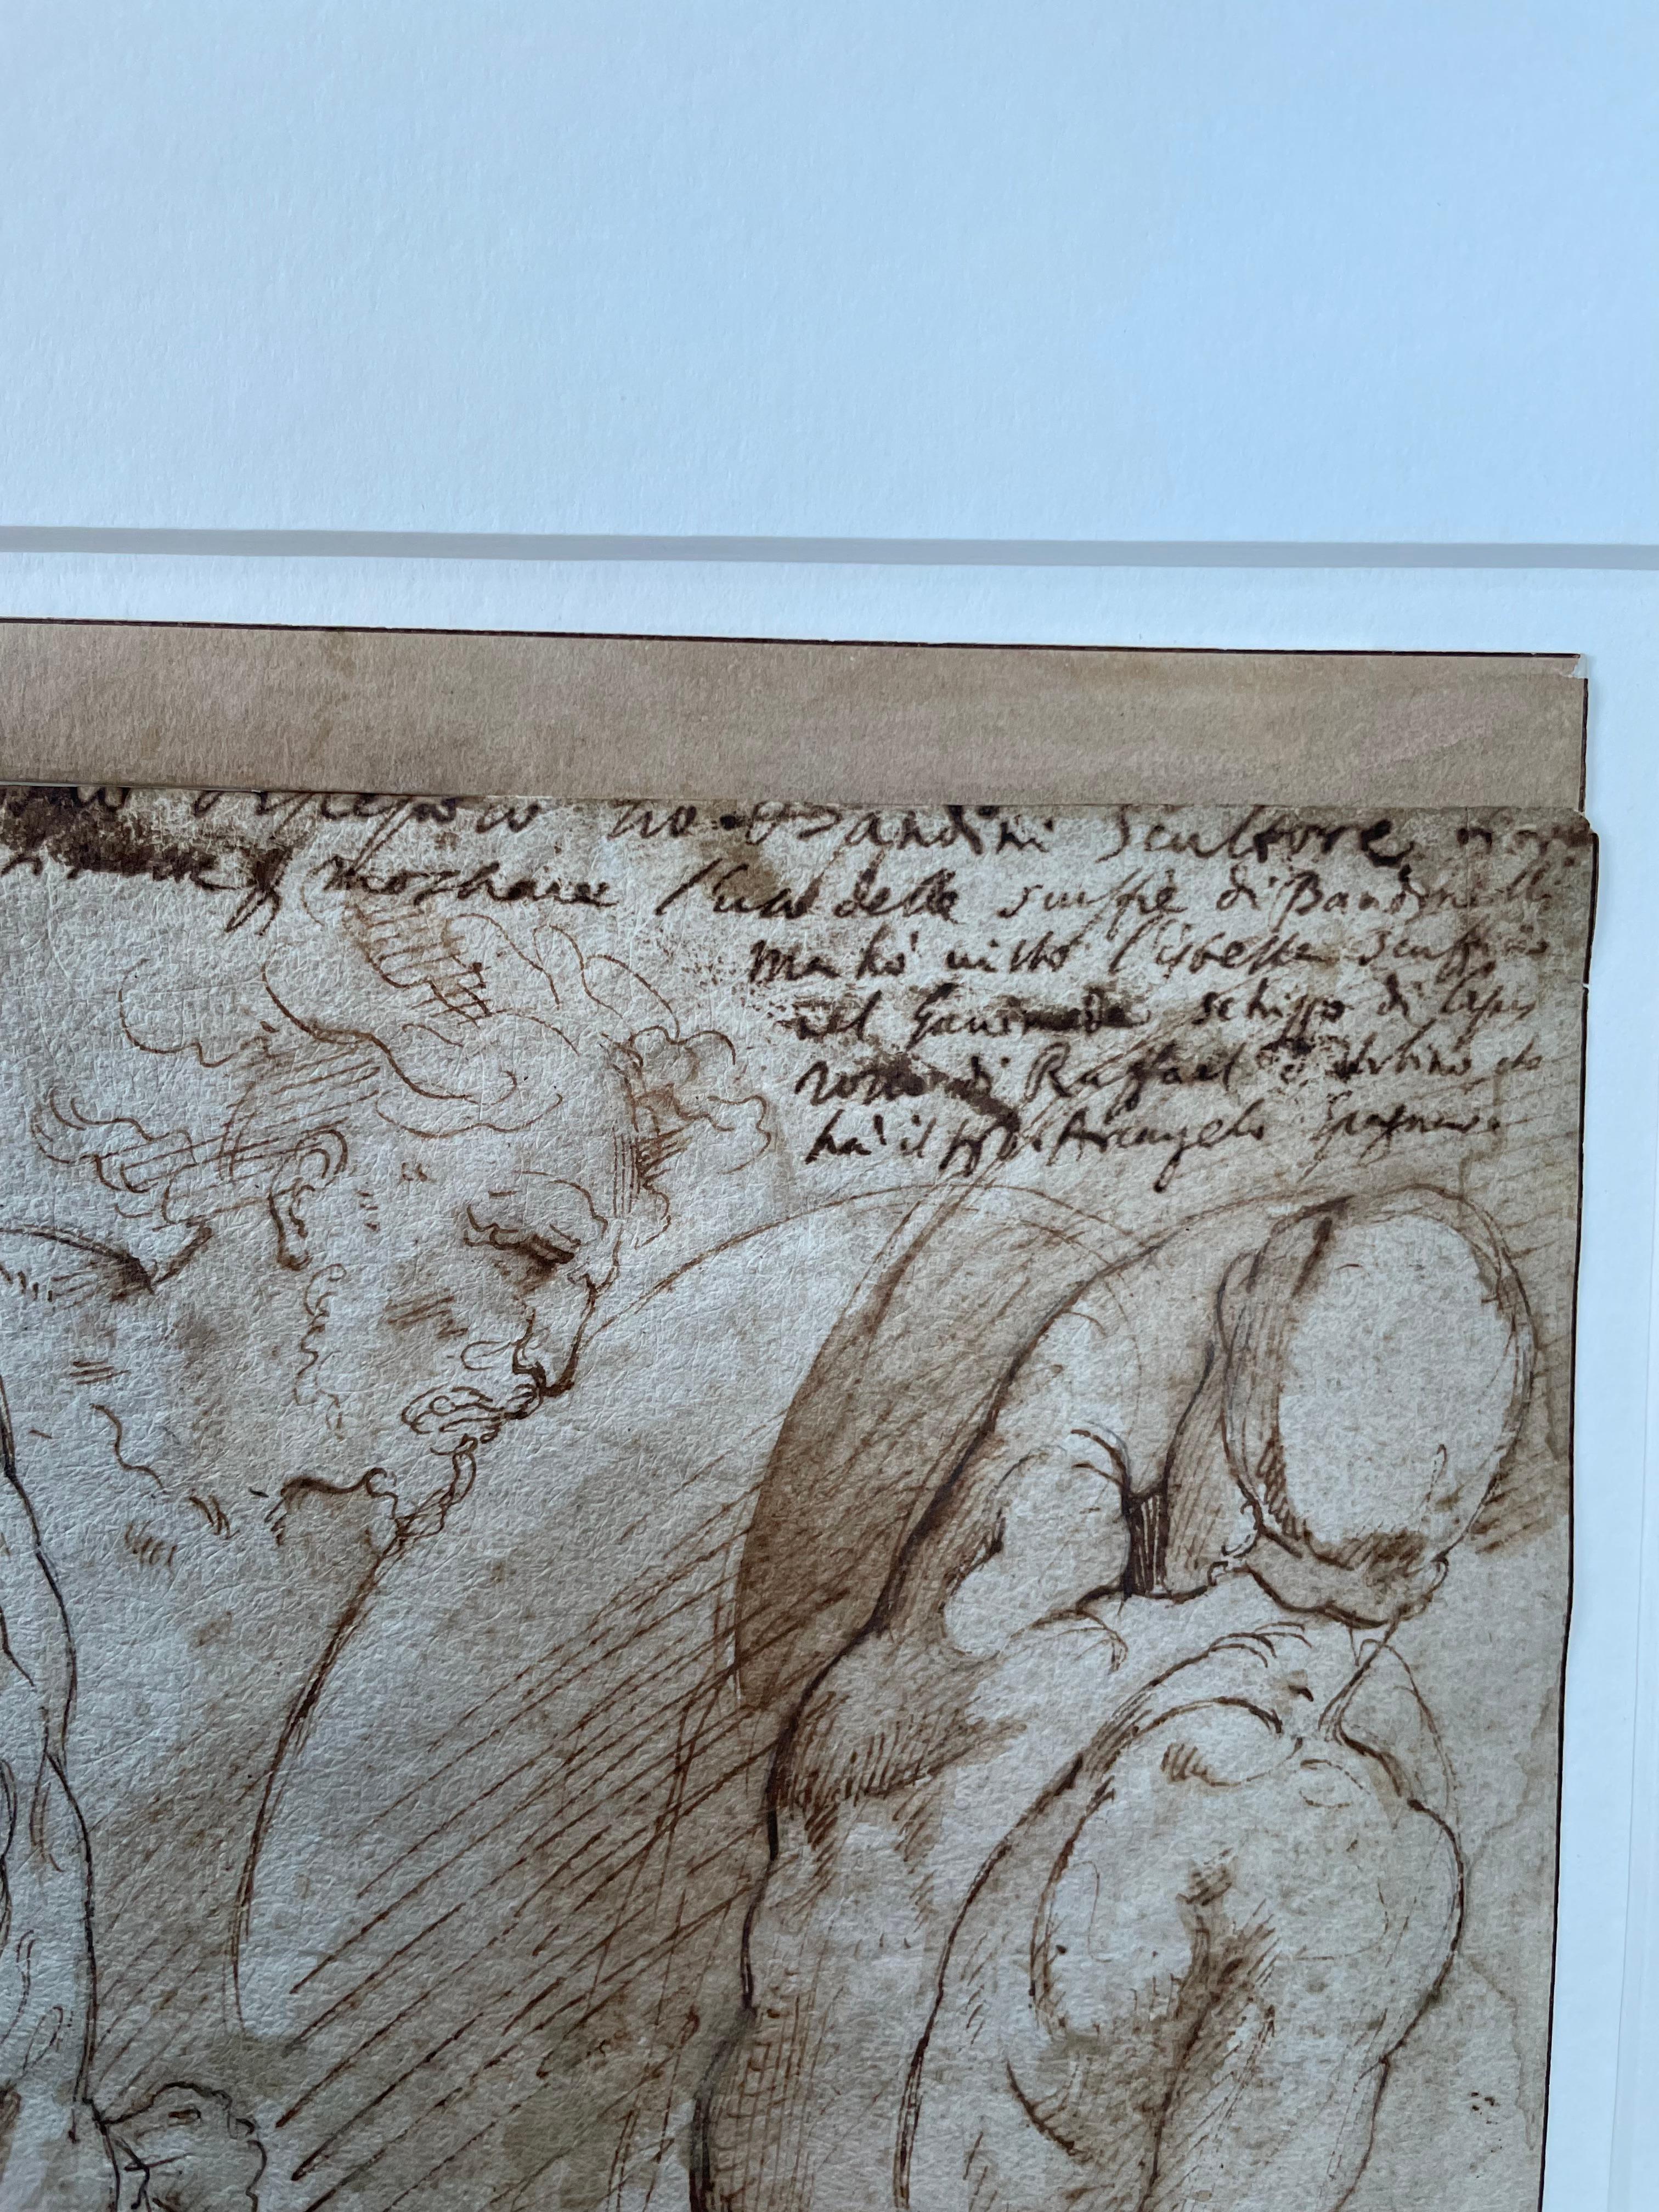 Jacopo Zanguidi BERTOJA (1544-1574)
Combat of five figures, bas-relief from the School of Athens after Raphael

Ink on paper
43×34cm

Interesting thing
According to Professor David Ekserdjian, the inscription on our sheet

« un suo discepolo Gio